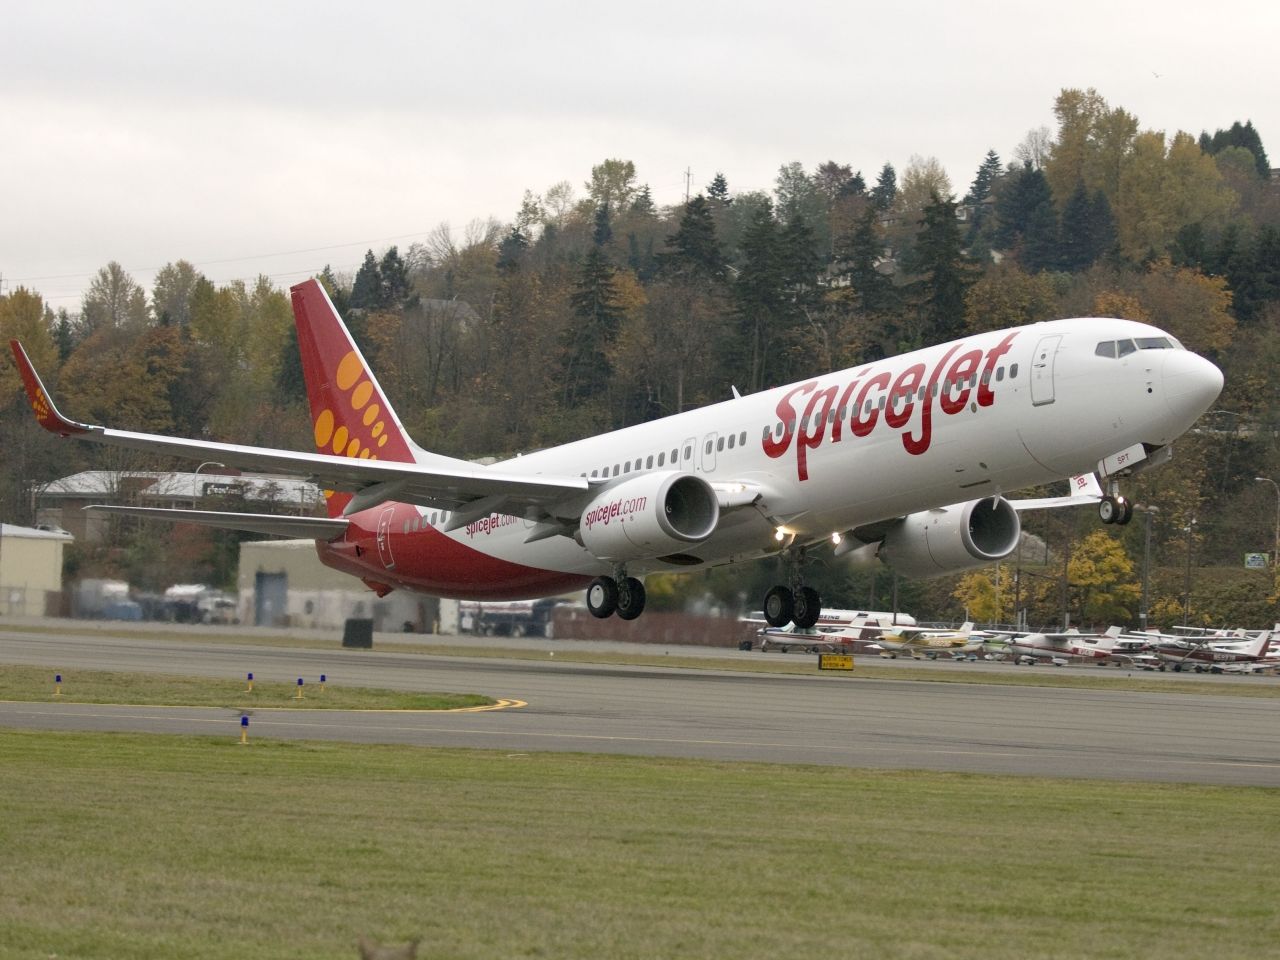 SpiceJet signs deal for up to 205 Boeing aircraft